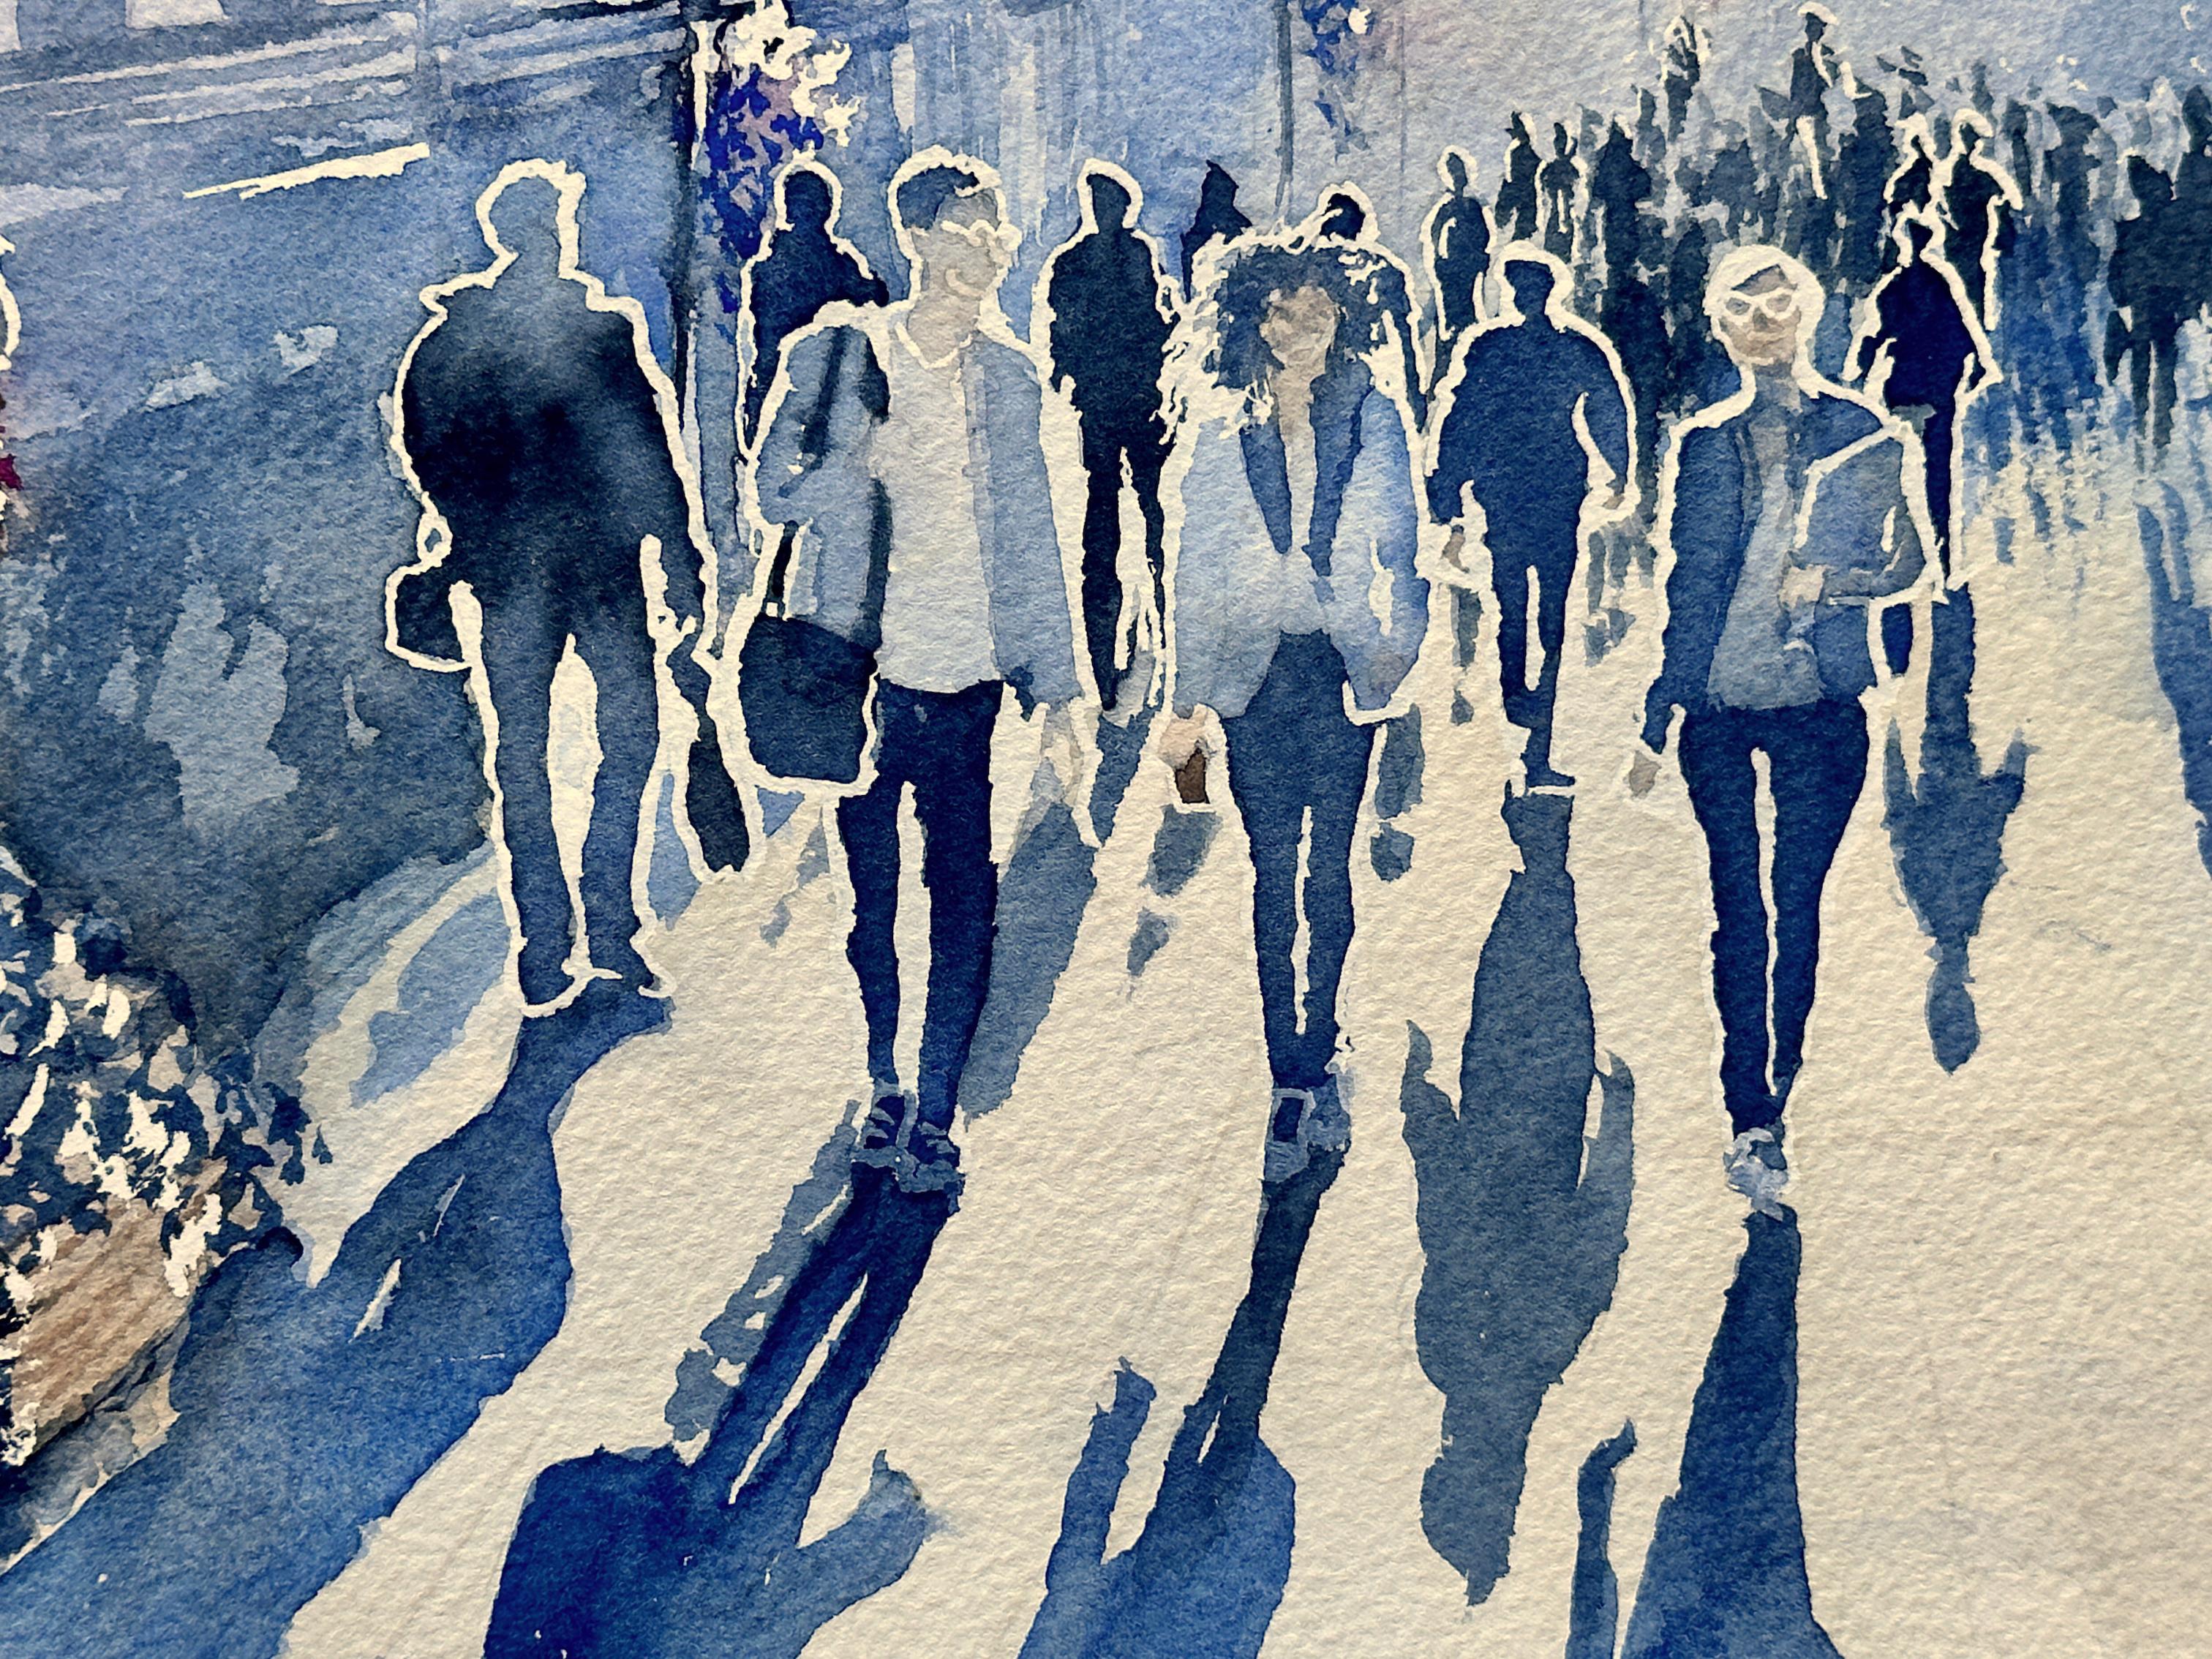 <p>Artist Comments<br>Artist Maurice Dionne illustrates crowds of people walking along the street in an impressionistic representation. 